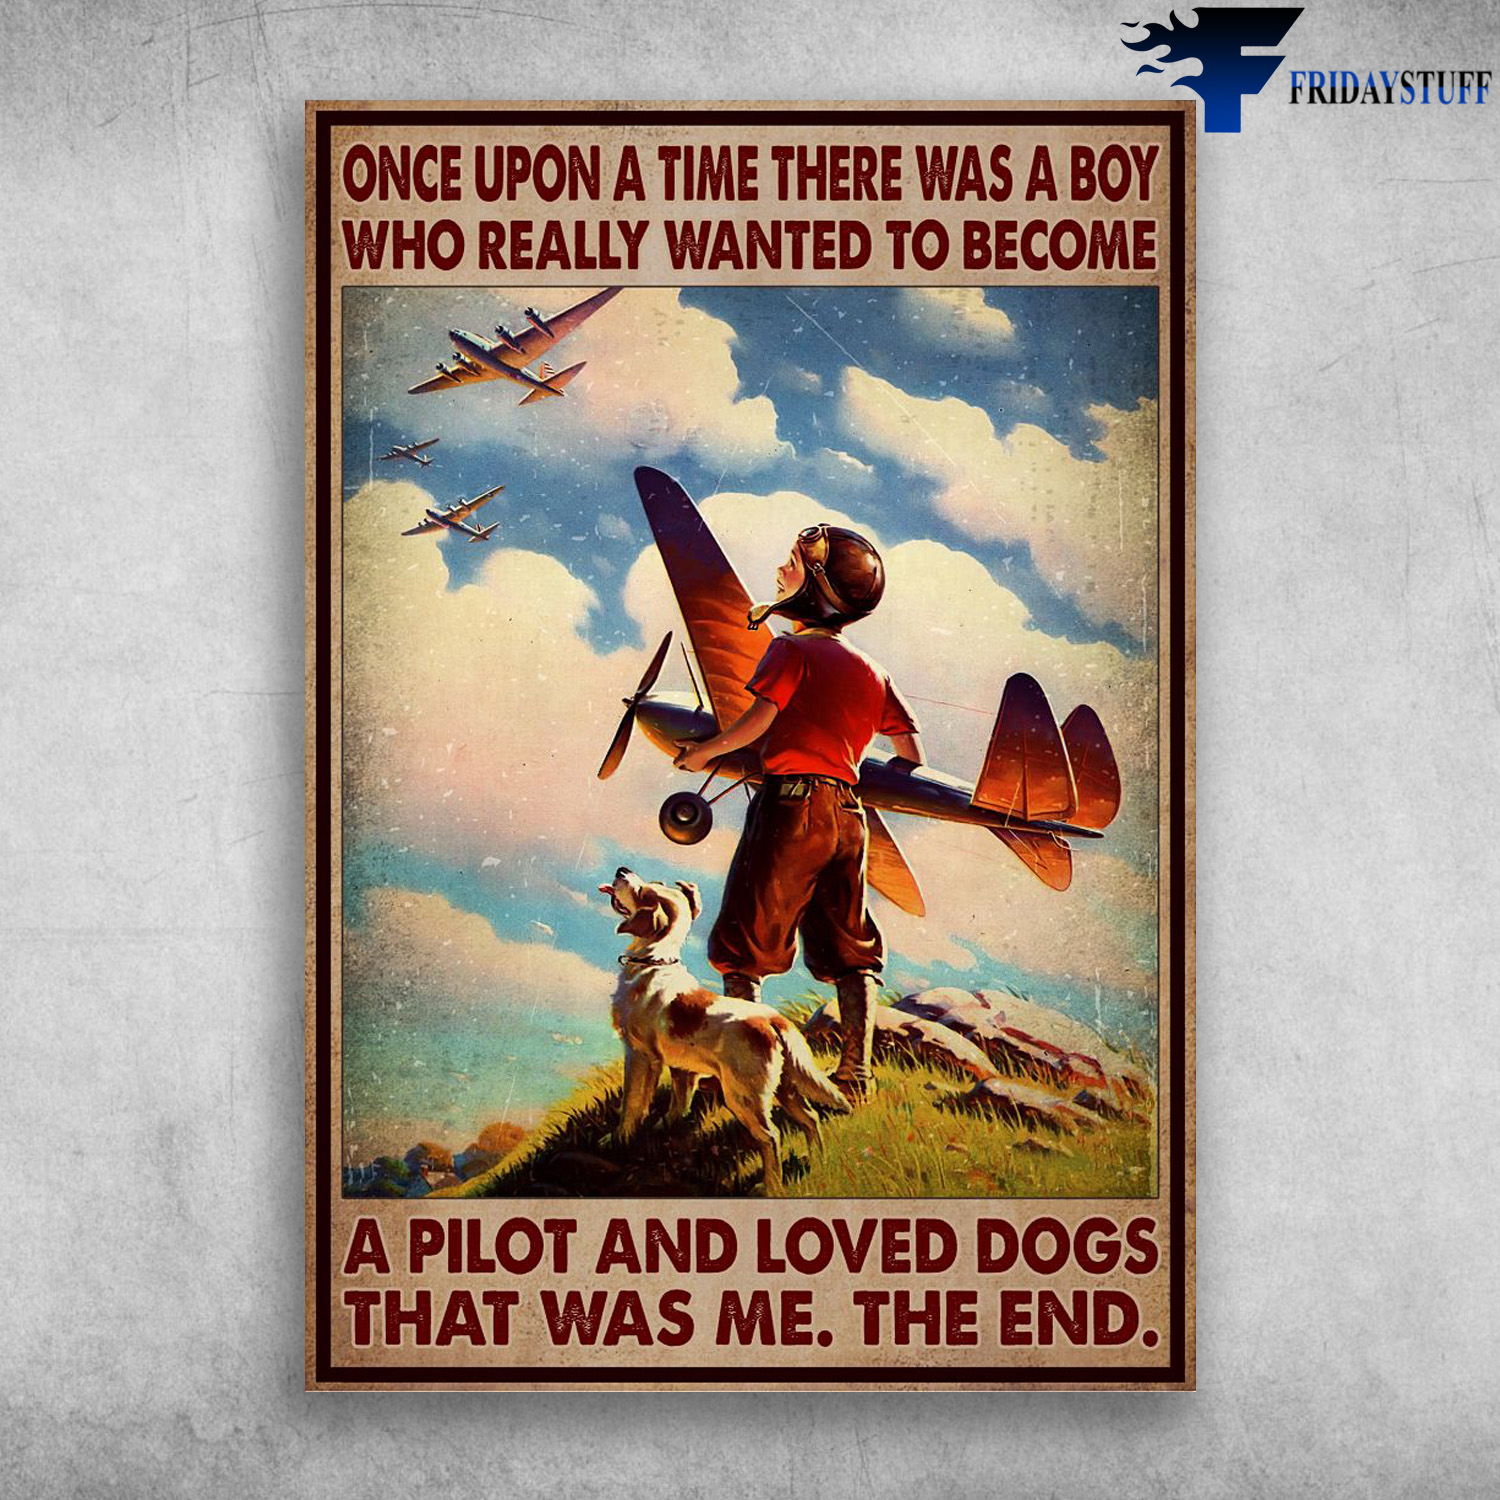 Pilot Boy And The Dog, Plane - Once Upon A Time, There Was A Boy, Who Really Wanted To Become A Pilot, And Loved Dogs, That Was Me, The End